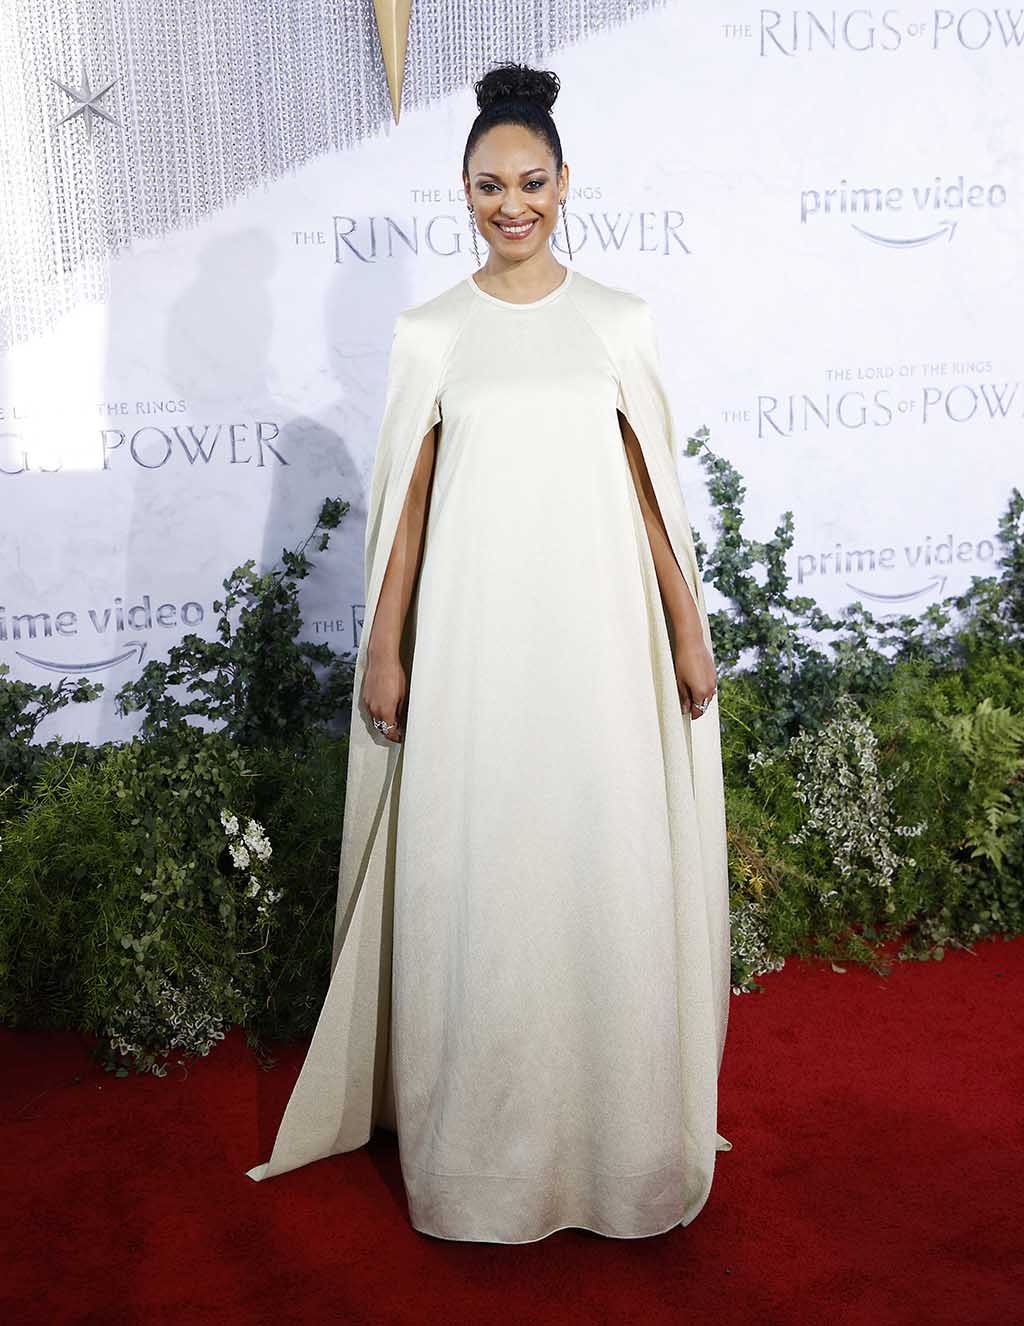 US actress Cynthia Addai-Robinson attends the premiere of Prime Video's 